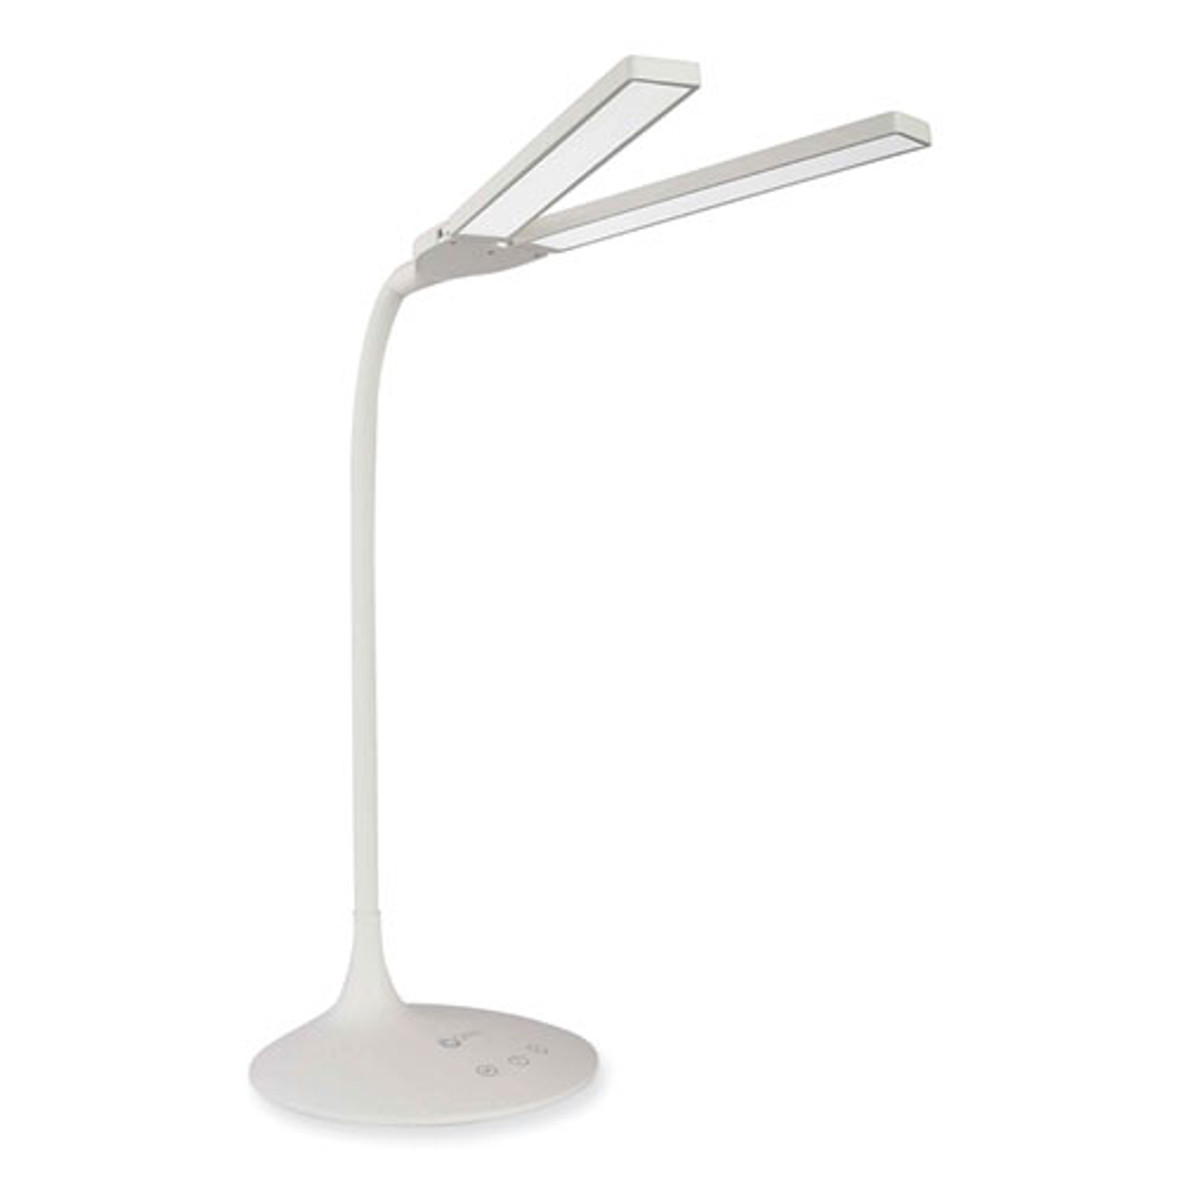 OttLite Wellness Series Pivot LED Desk Lamp With Dual Shades, 13.25" To 26" High, White